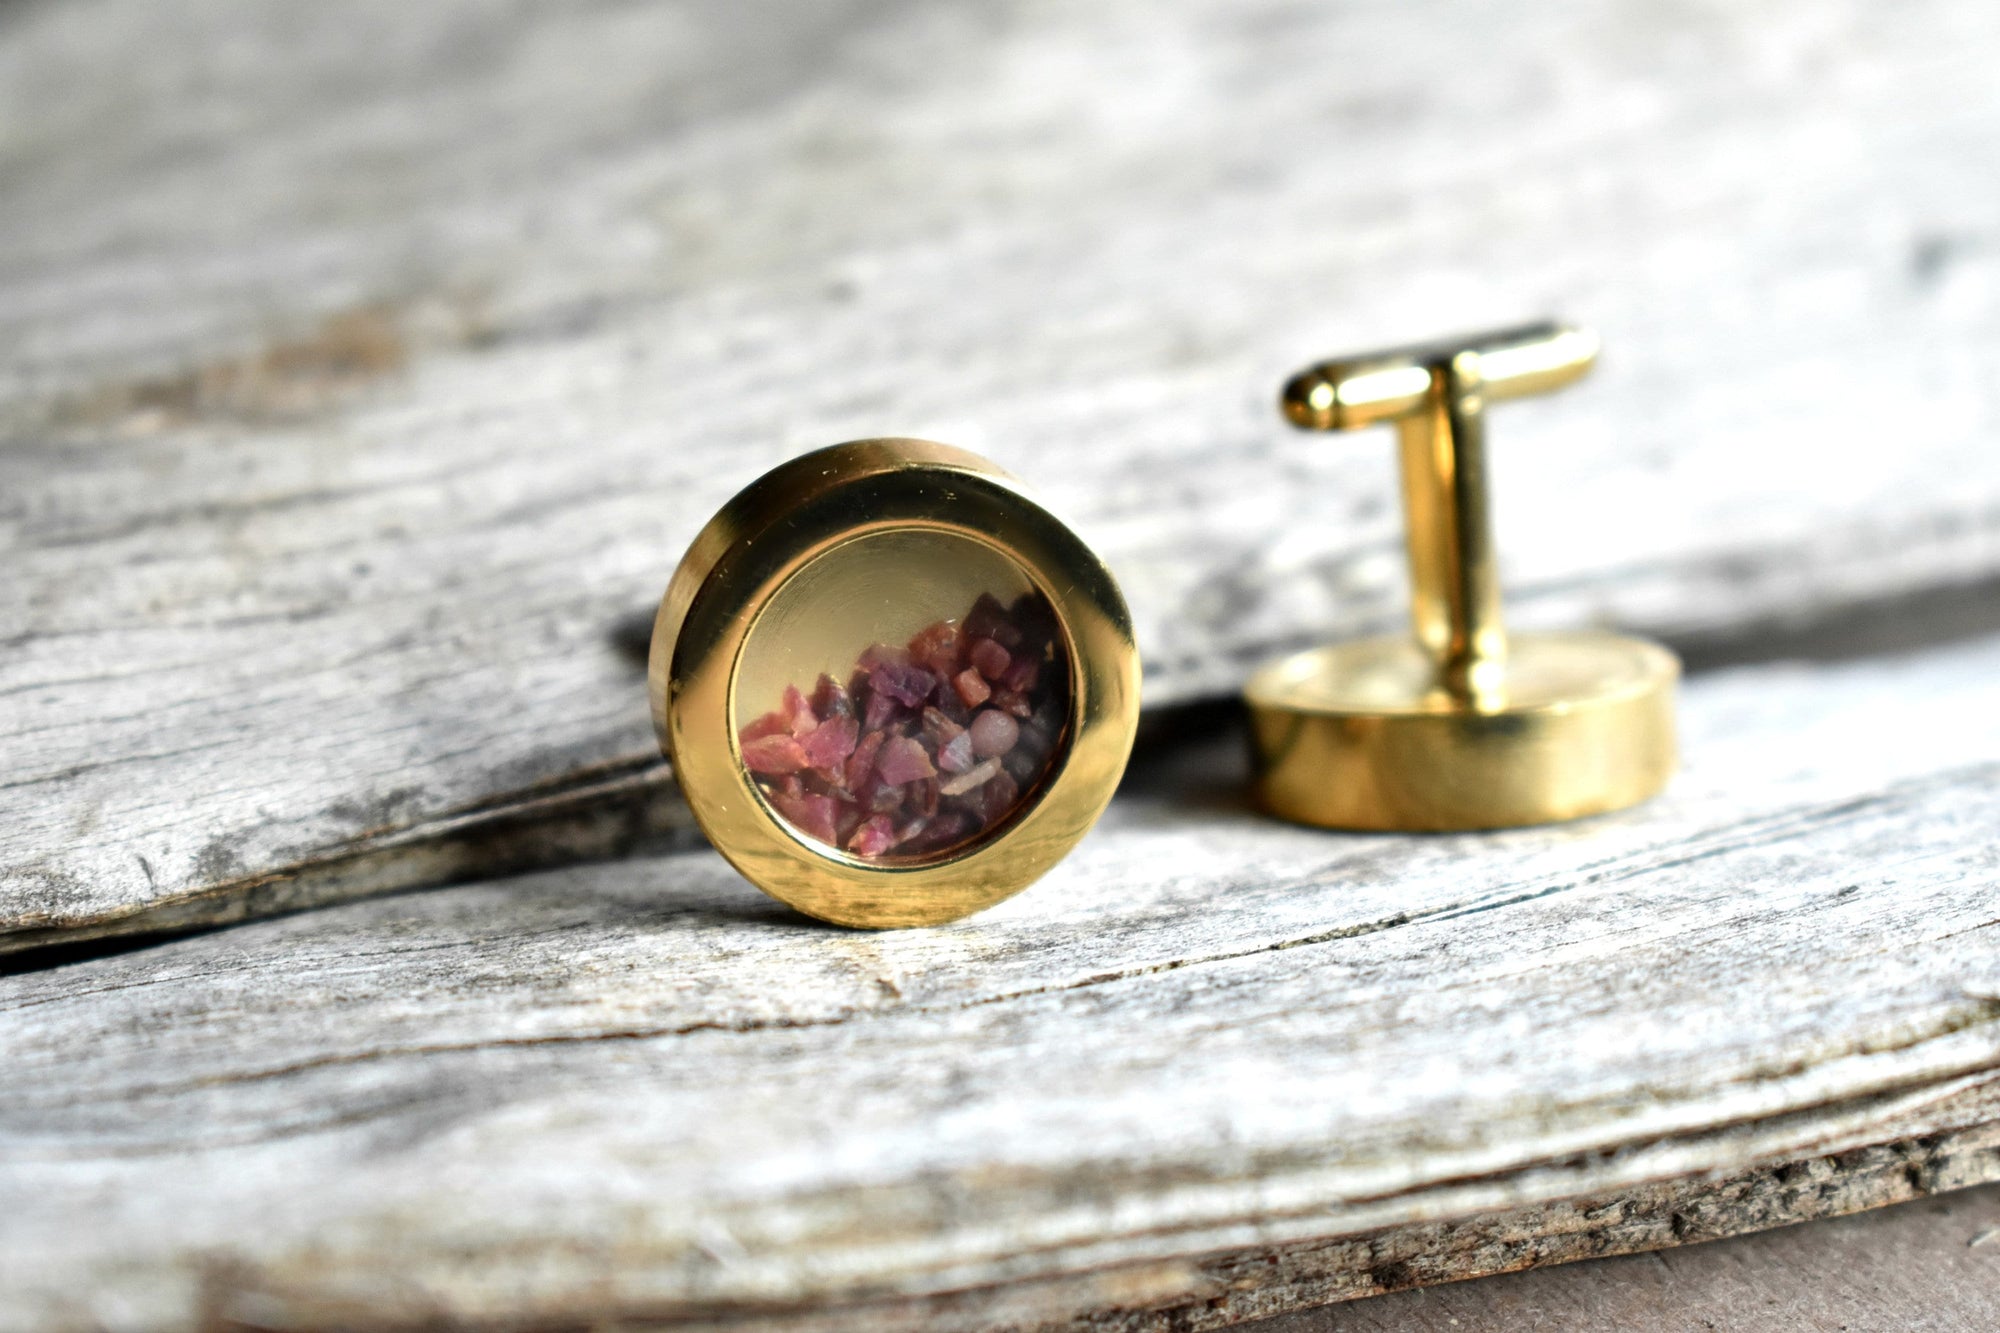 Ruby and Gold Cufflinks, Mens July Birthstone, Round Gold Cuff Links, Gold and Red Rough Stone Cufflinks, Unique Men's Jewelry for Christmas